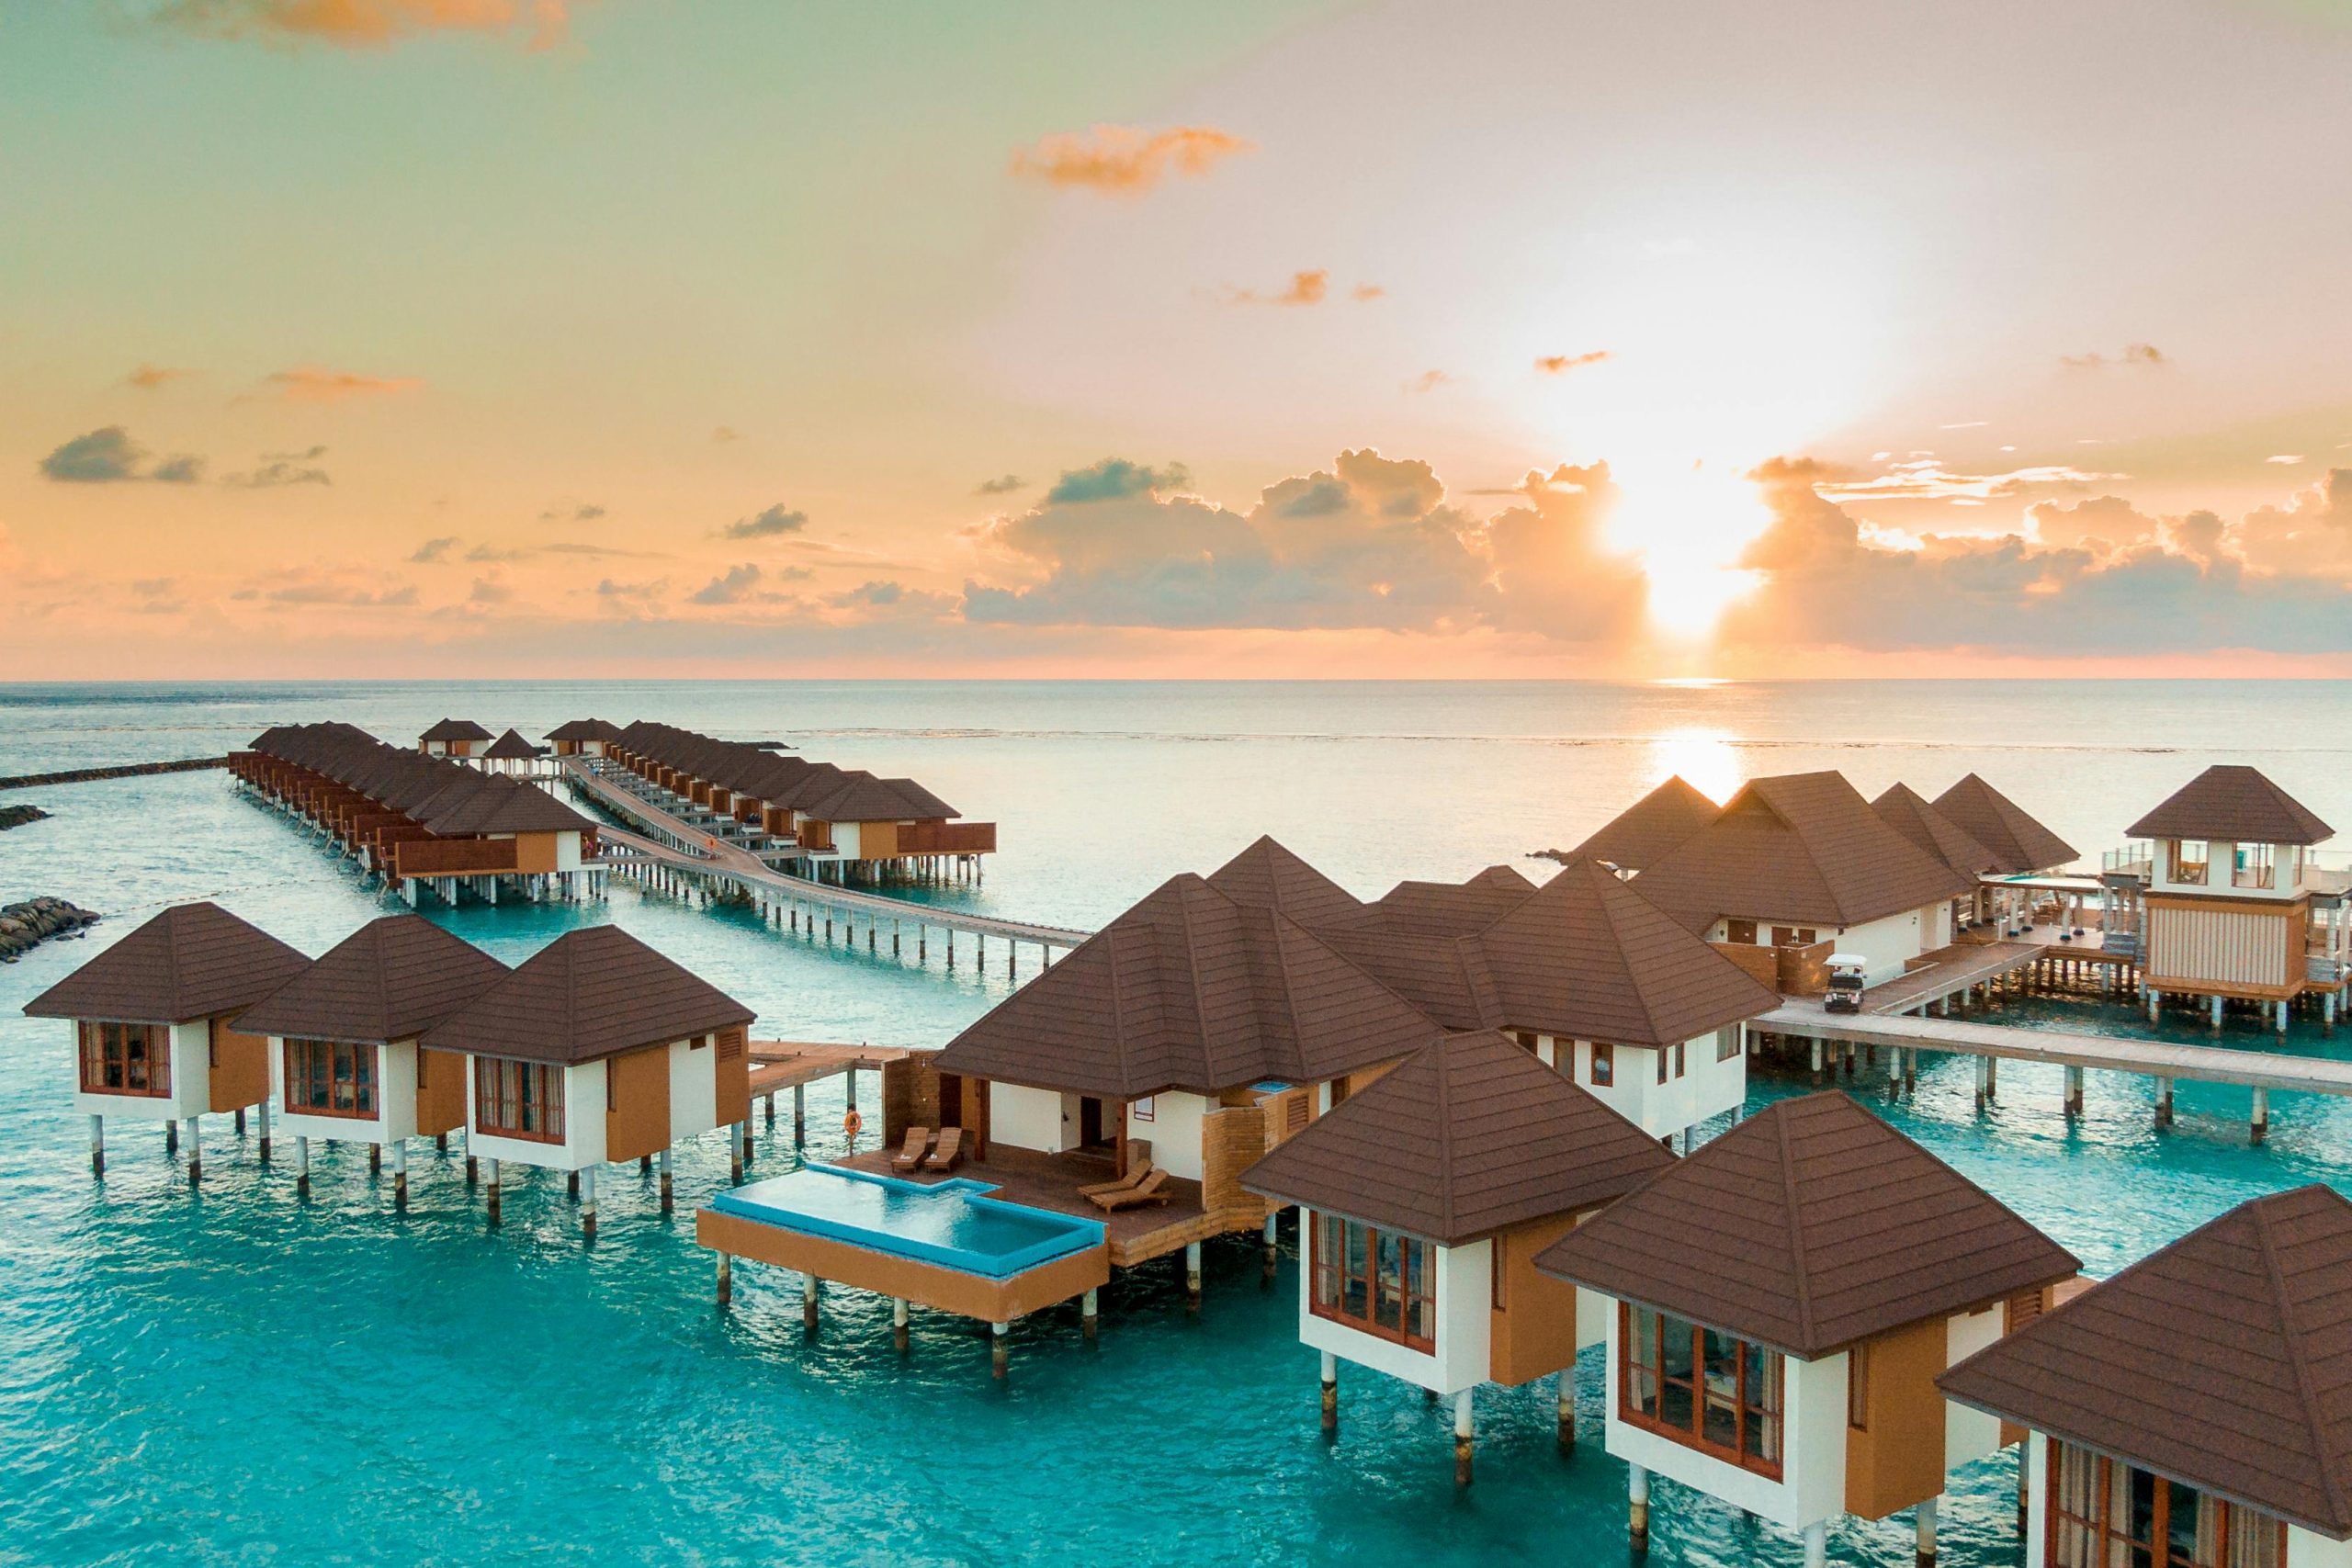 Maldives Sightseeing Tour Package: